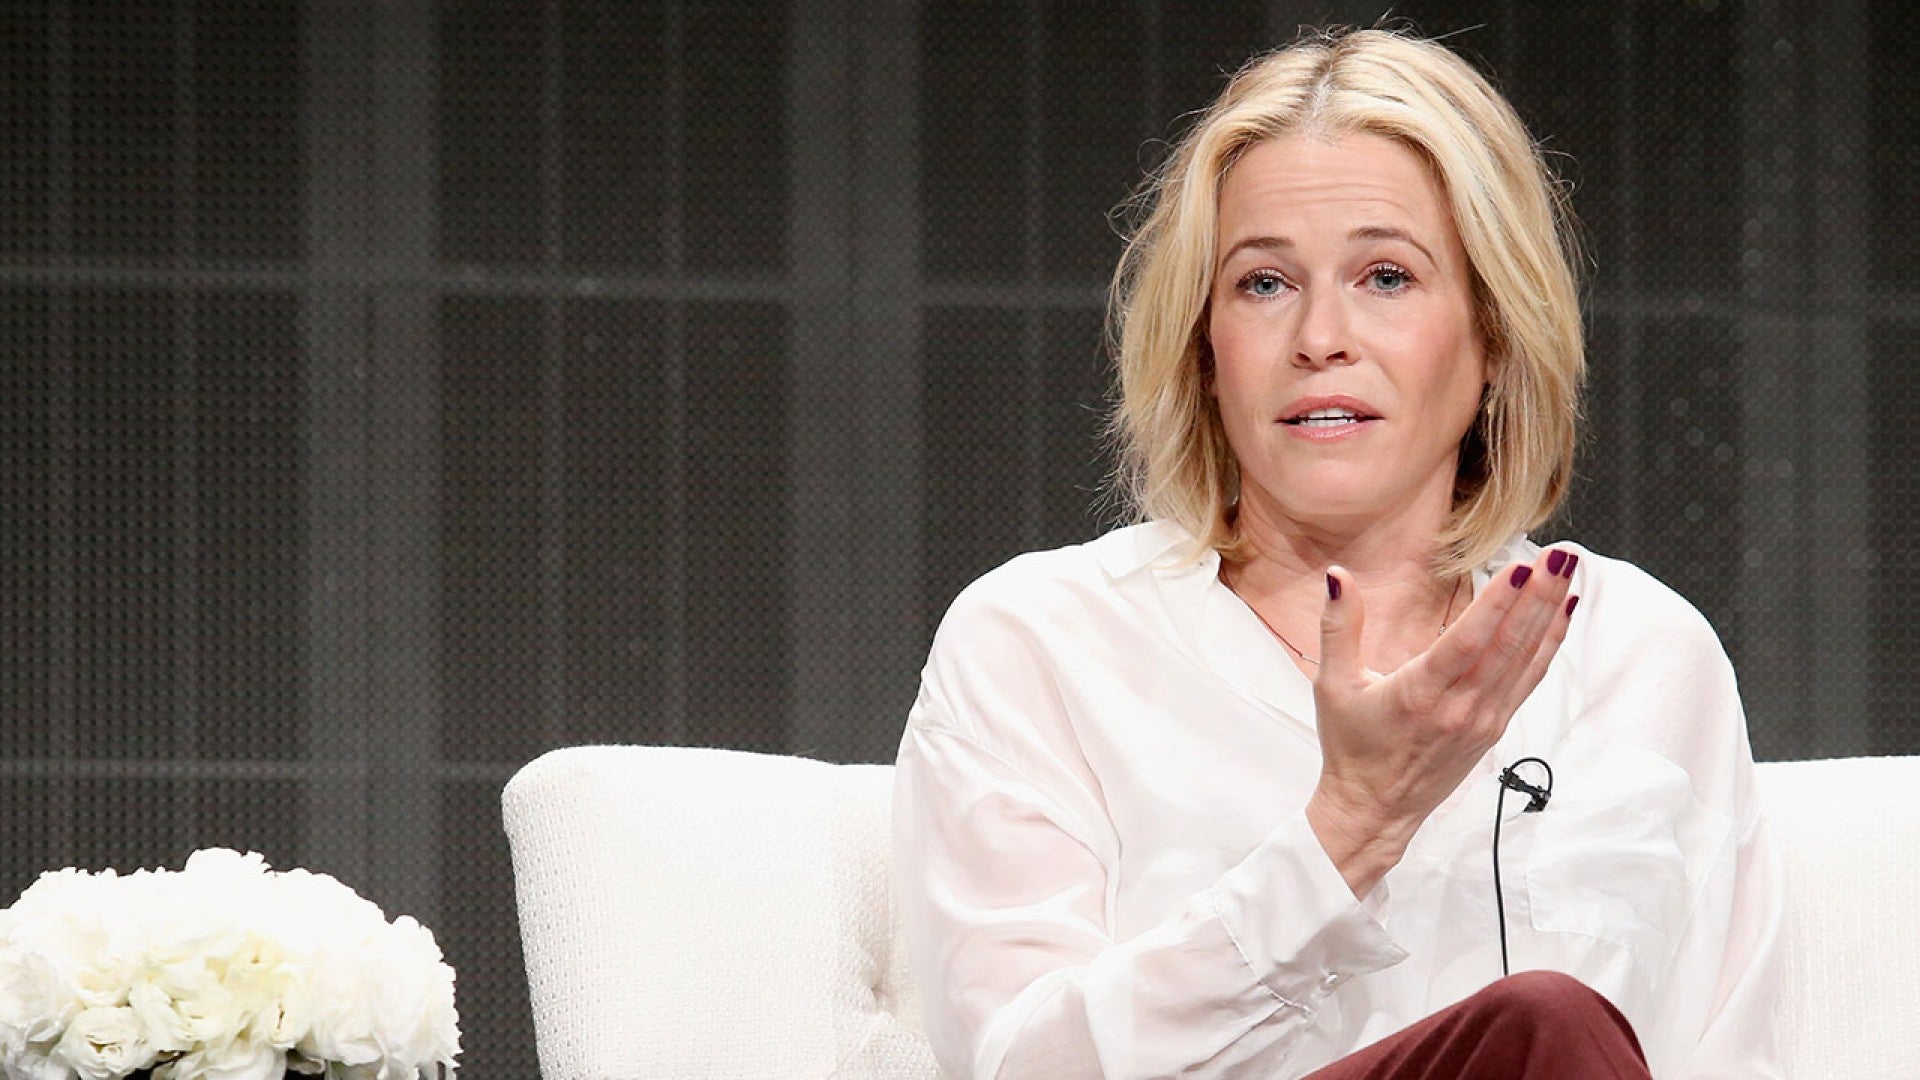 Chelsea Handler Reveals Why She Posts All Those Nude Photos